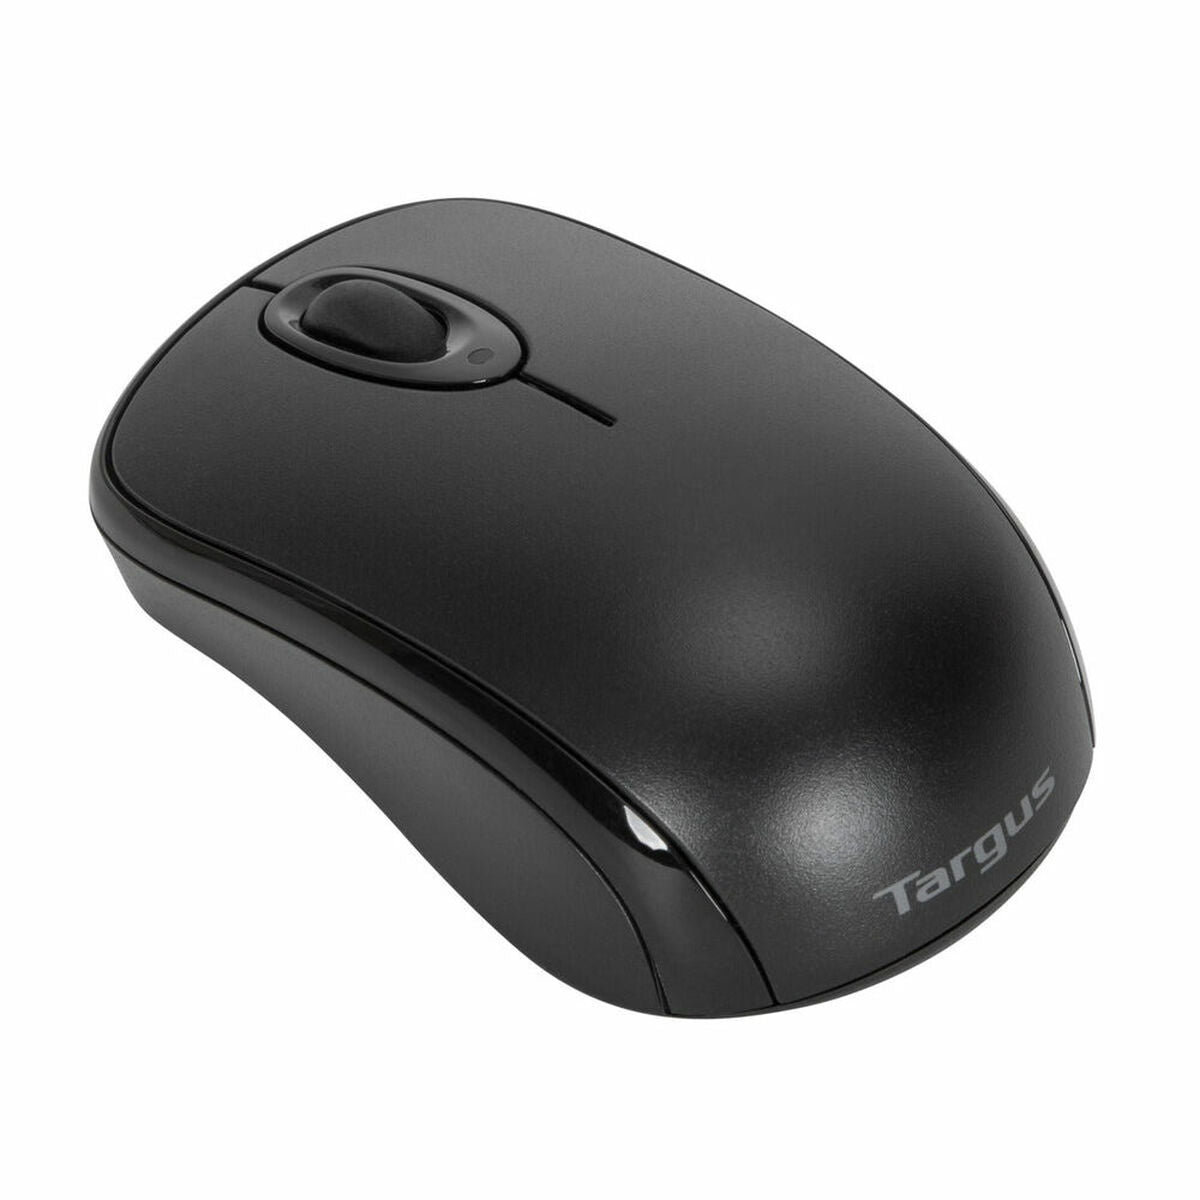 Wireless Mouse Targus AMB844GL Bluetooth Black, Targus, Computing, Accessories, wireless-mouse-targus-amb844gl-bluetooth-black, Brand_Targus, category-reference-2609, category-reference-2642, category-reference-2656, category-reference-t-19685, category-reference-t-19908, category-reference-t-21353, computers / peripherals, Condition_NEW, office, Price_20 - 50, Teleworking, RiotNook